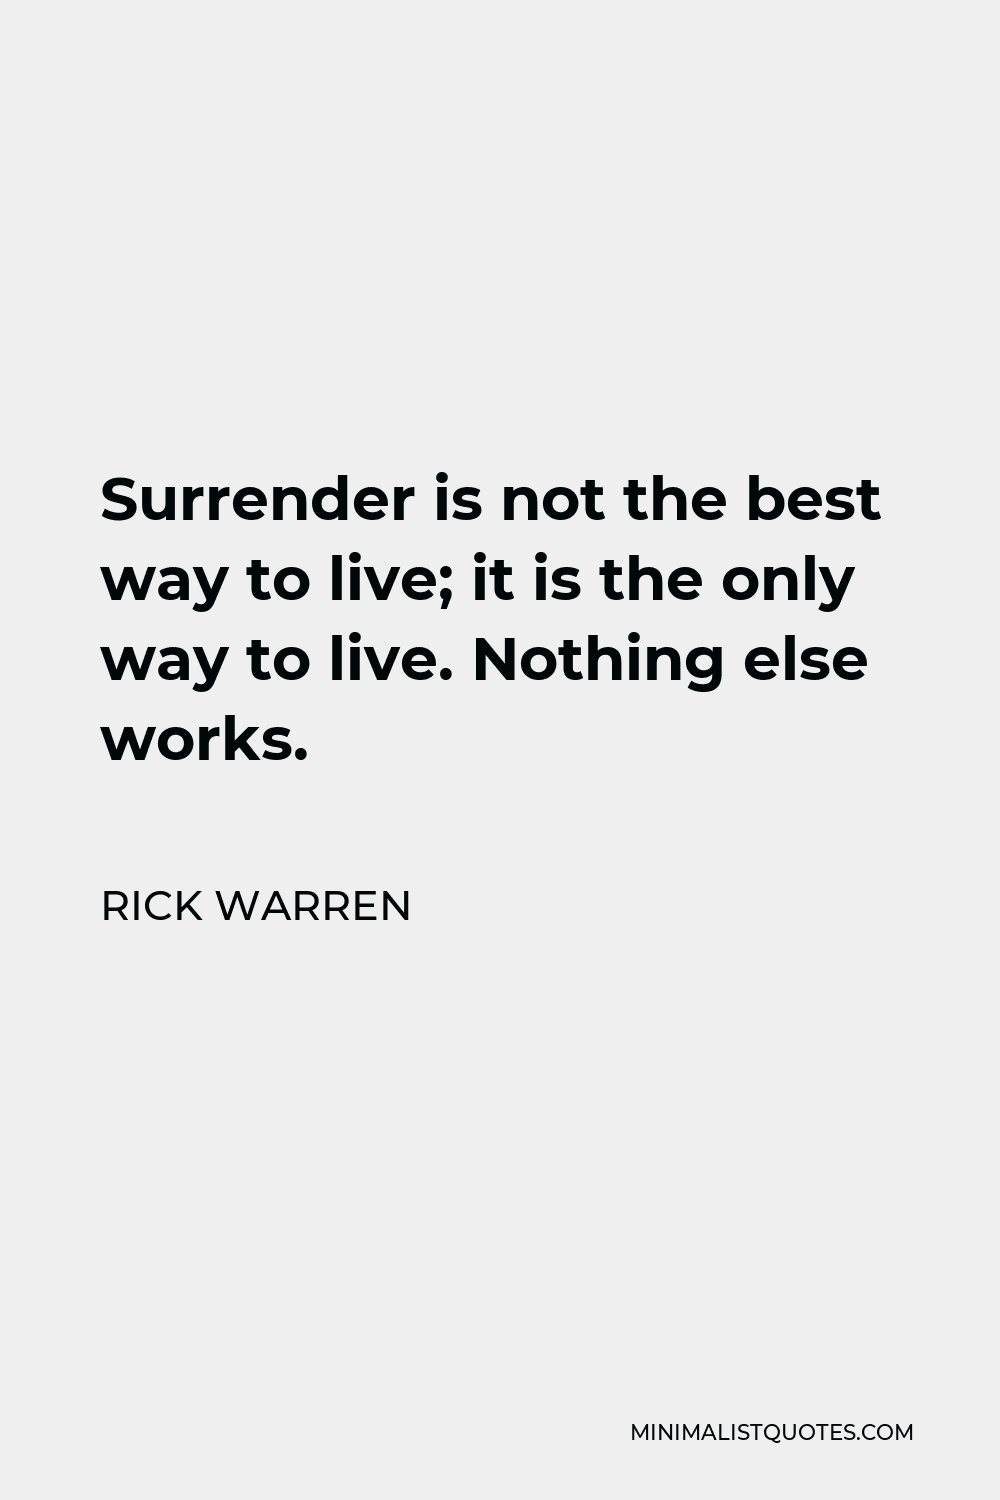 Rick Warren Quote - Surrender is not the best way to live; it is the only way to live. Nothing else works.